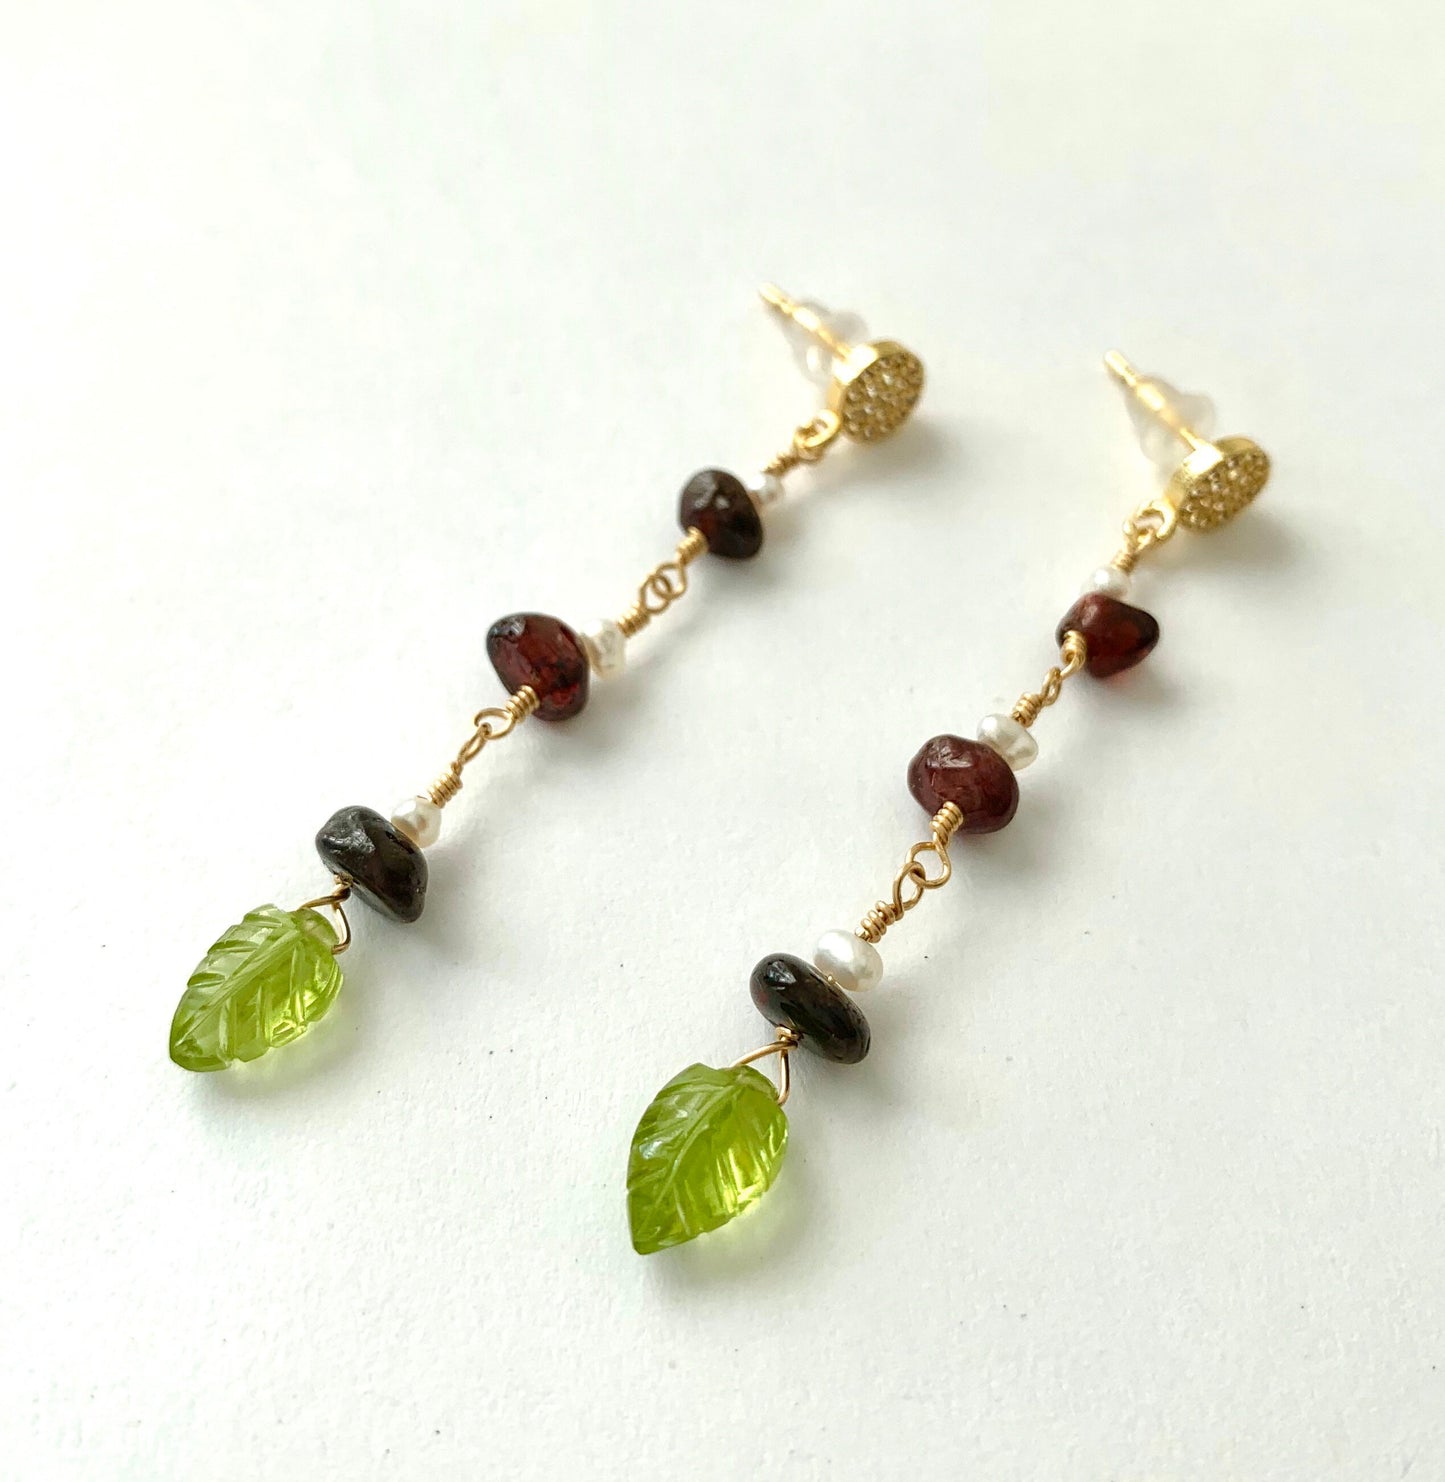 yellow gold filled dangle earring with pave' cz round studs and 3 garnet and pearl stations suspended from chain. carved peridot leaves hang from the bottom.  